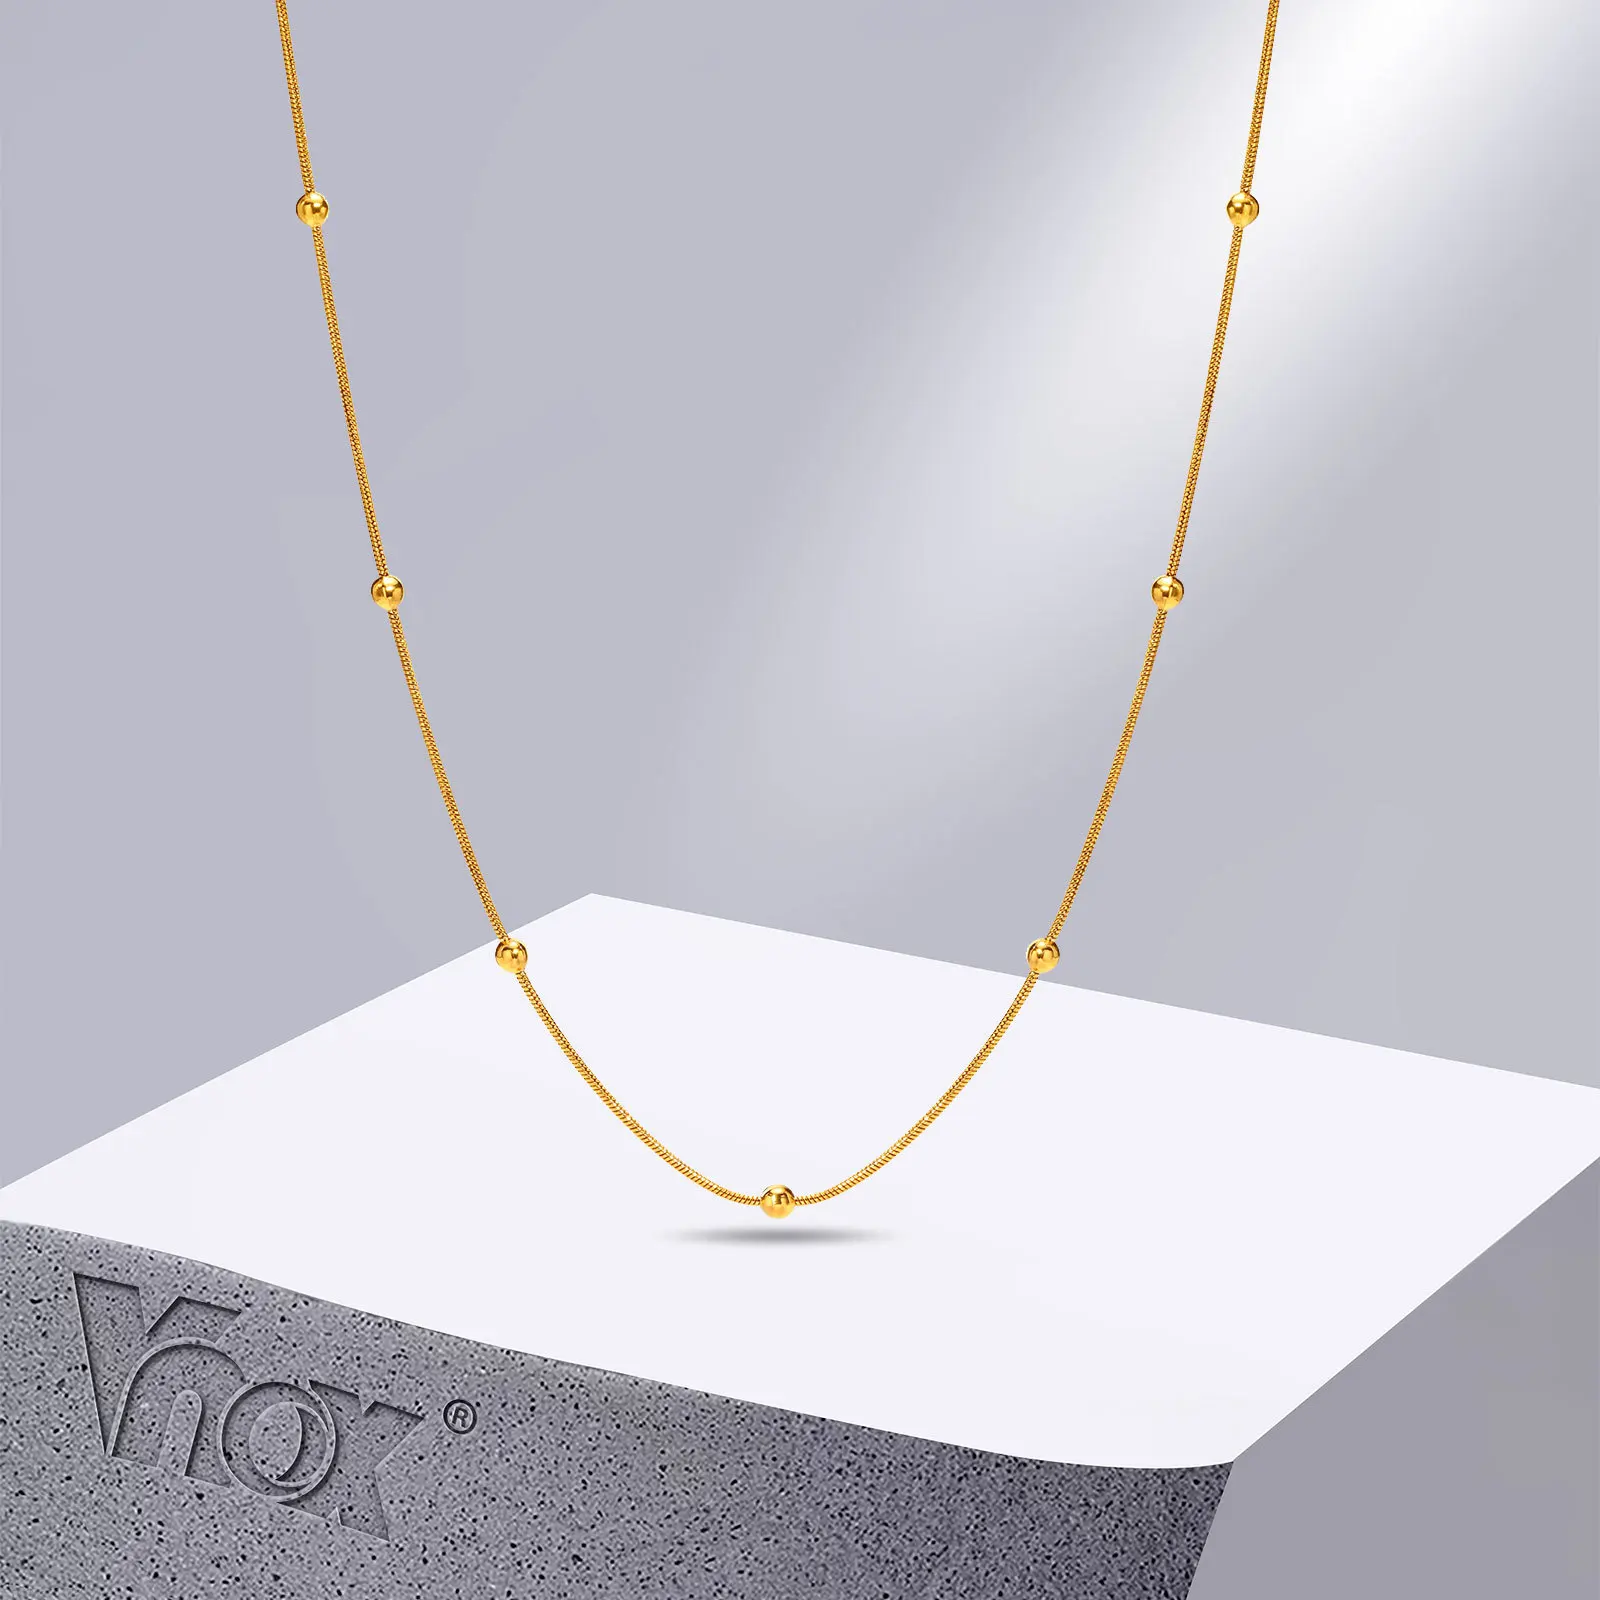 

Vnox Delicate Satellite Chain Necklaces for Women,Chic Gold Color Anti Allergy Stainless Steel Choker Collar Jewelry Gift to Her